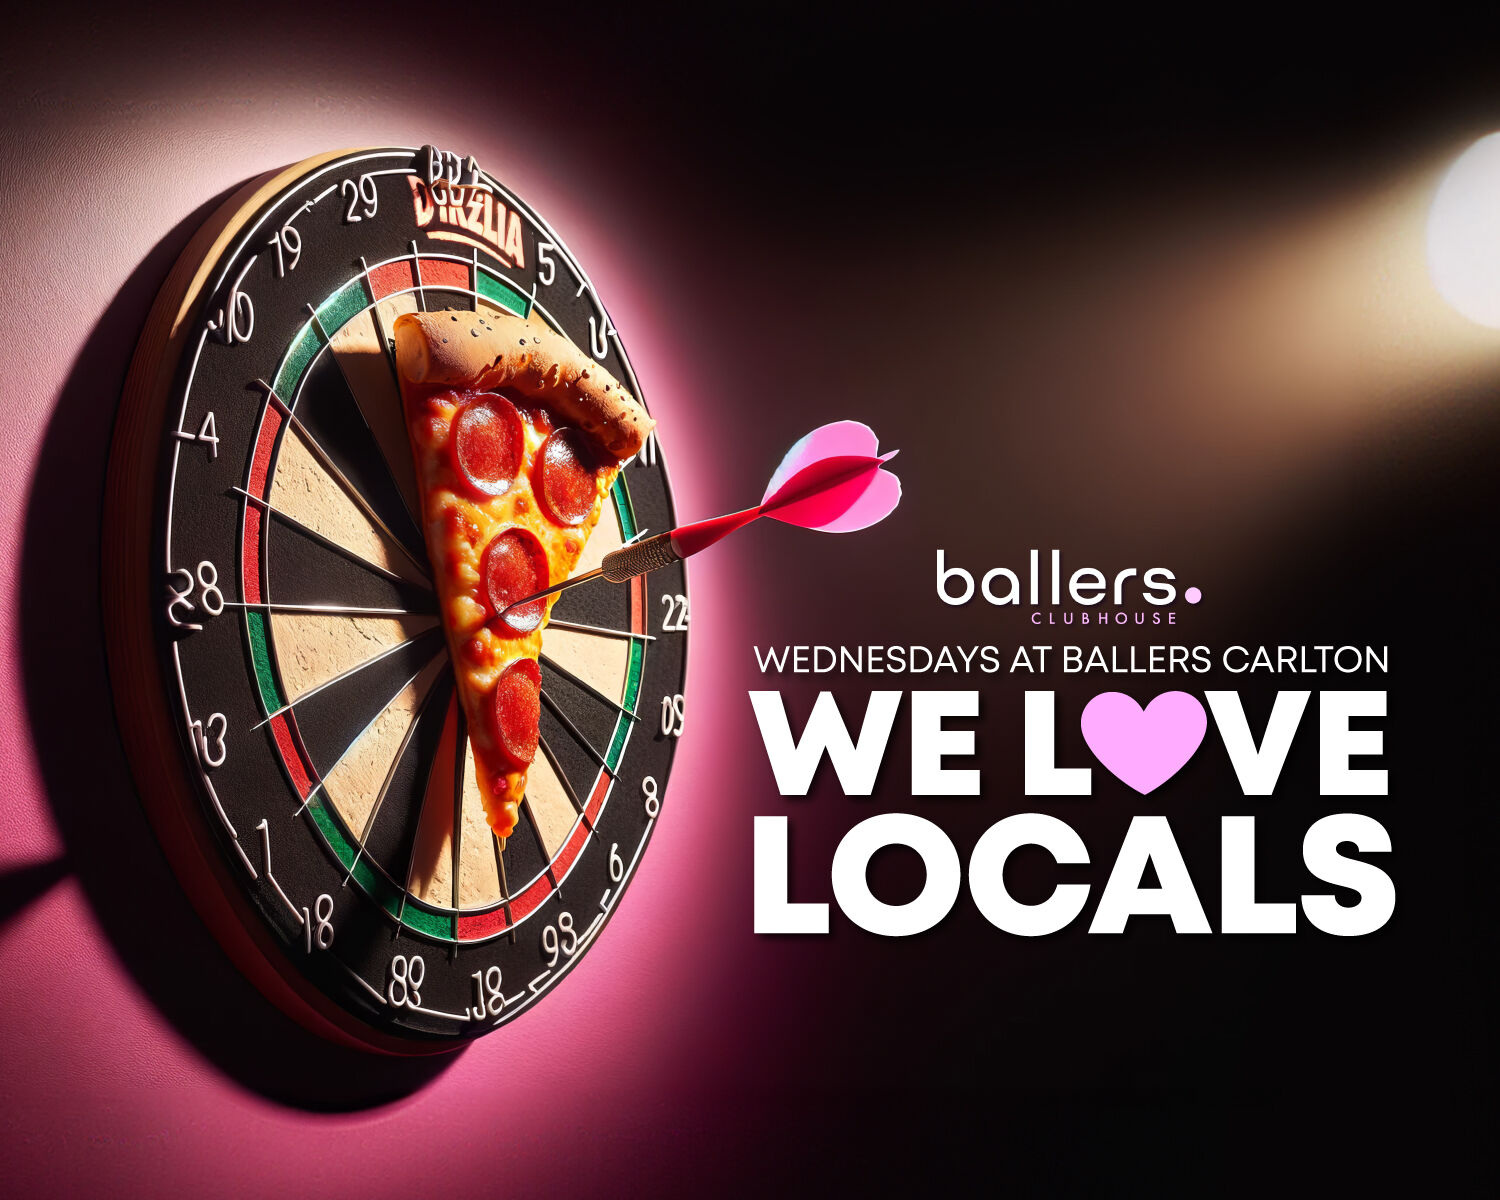 We Love Locals | Weekly promo | Free games and discounted food and drinks for Carlton locals! | Ballers Clubhouse Carlton